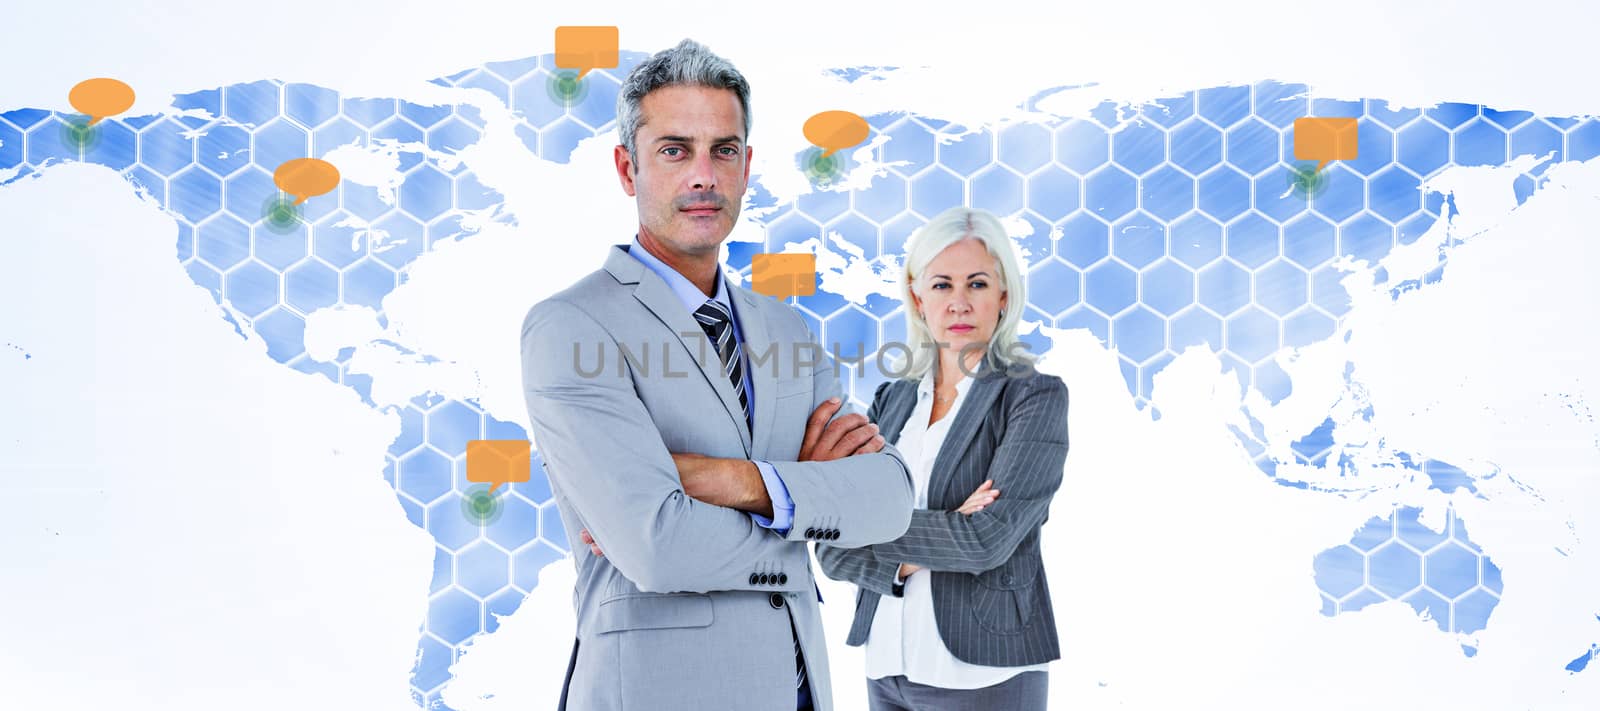  Smiling businesswoman and man with arms crossed against world map 